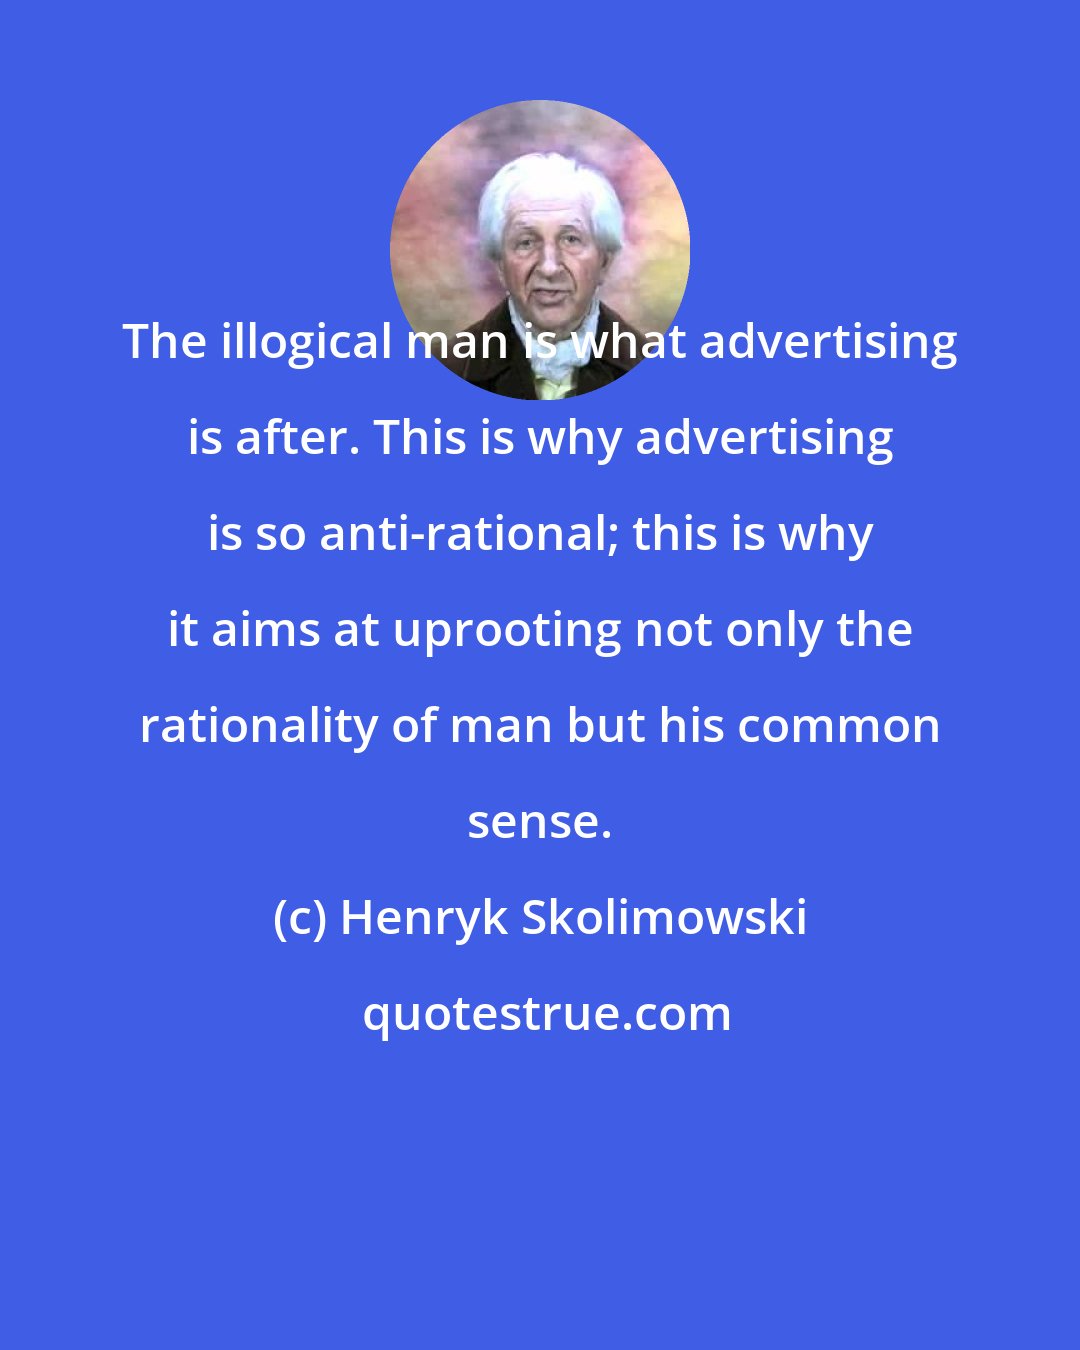 Henryk Skolimowski: The illogical man is what advertising is after. This is why advertising is so anti-rational; this is why it aims at uprooting not only the rationality of man but his common sense.